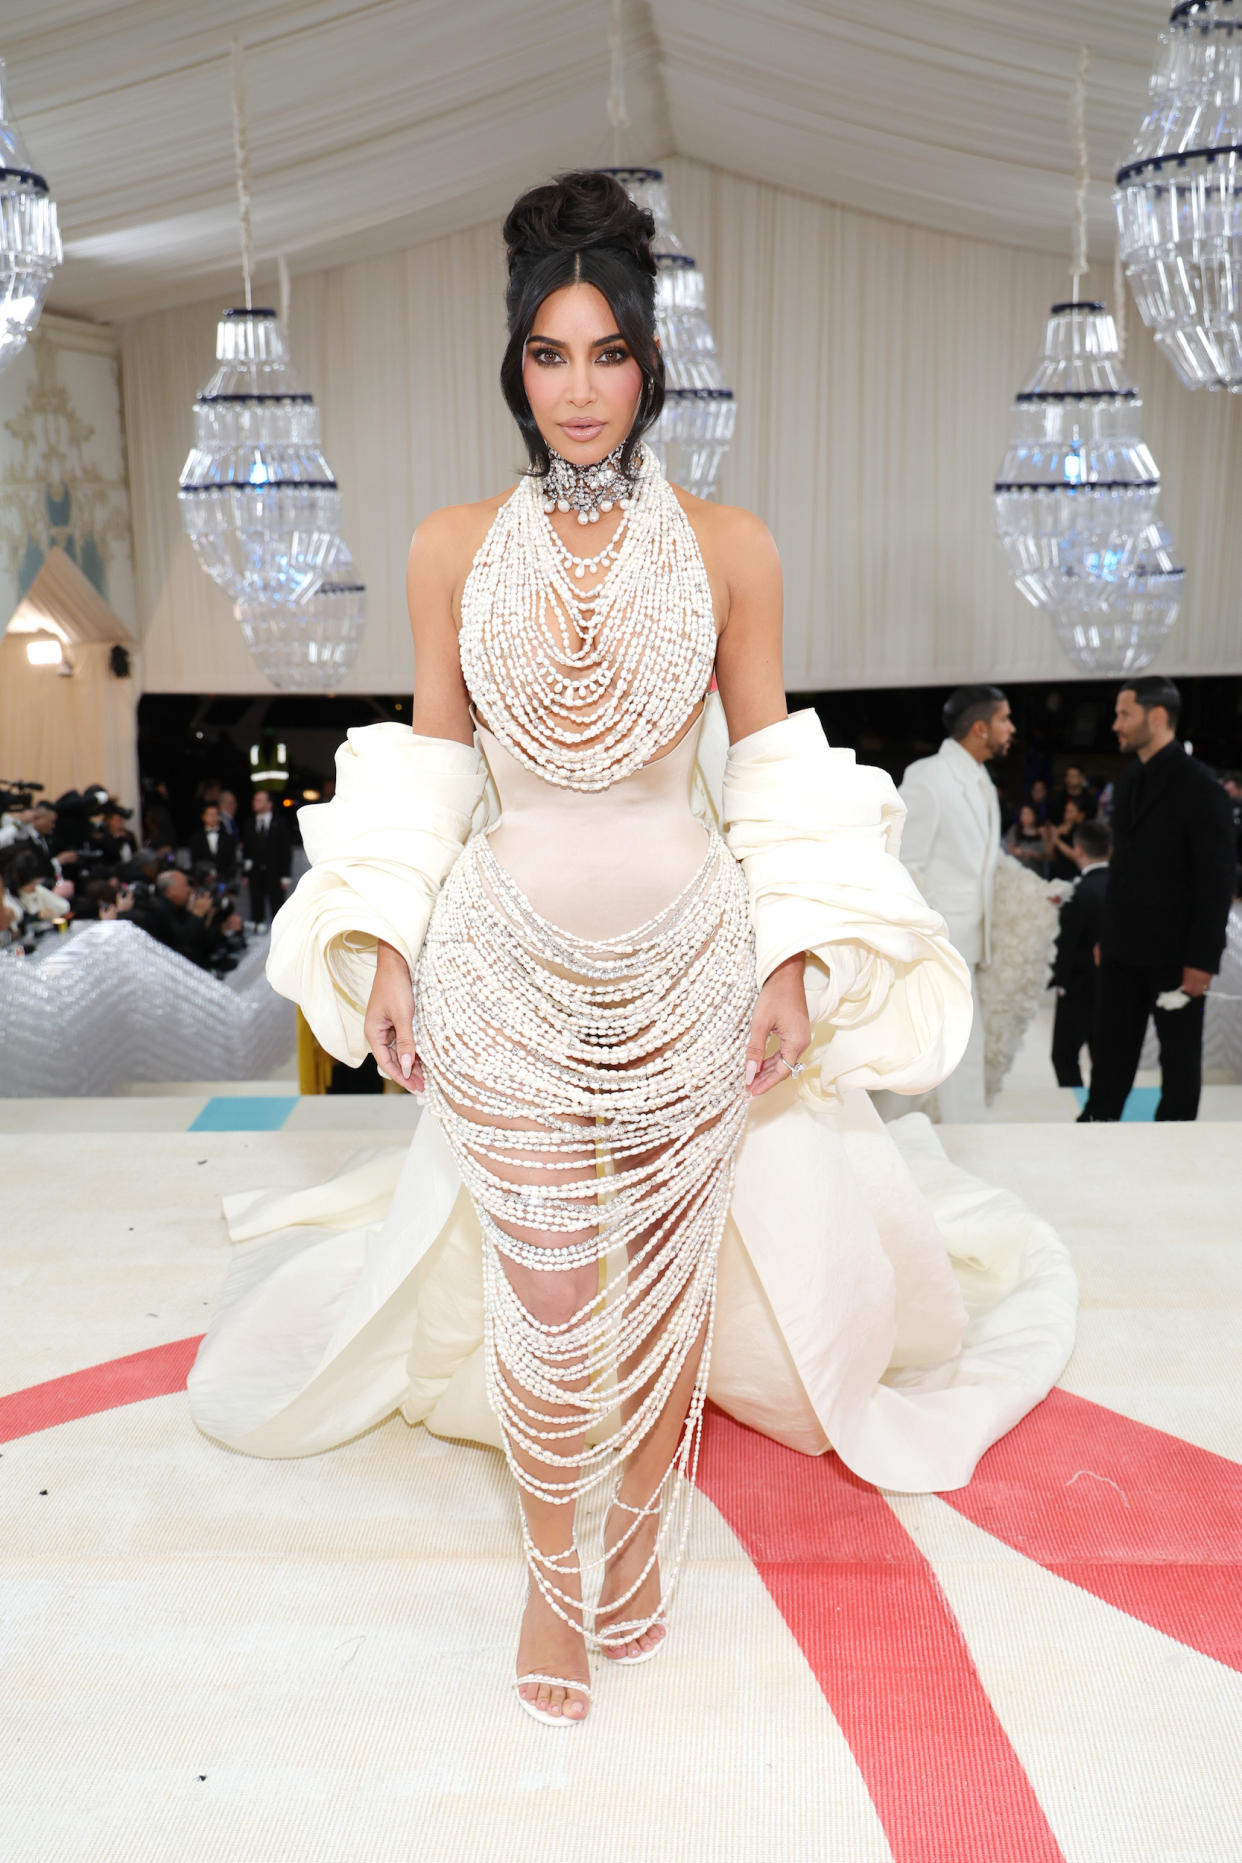 Kim at the 2023 event. (Kevin Mazur/MG23 / Getty Images for The Met Museum/Vogue)